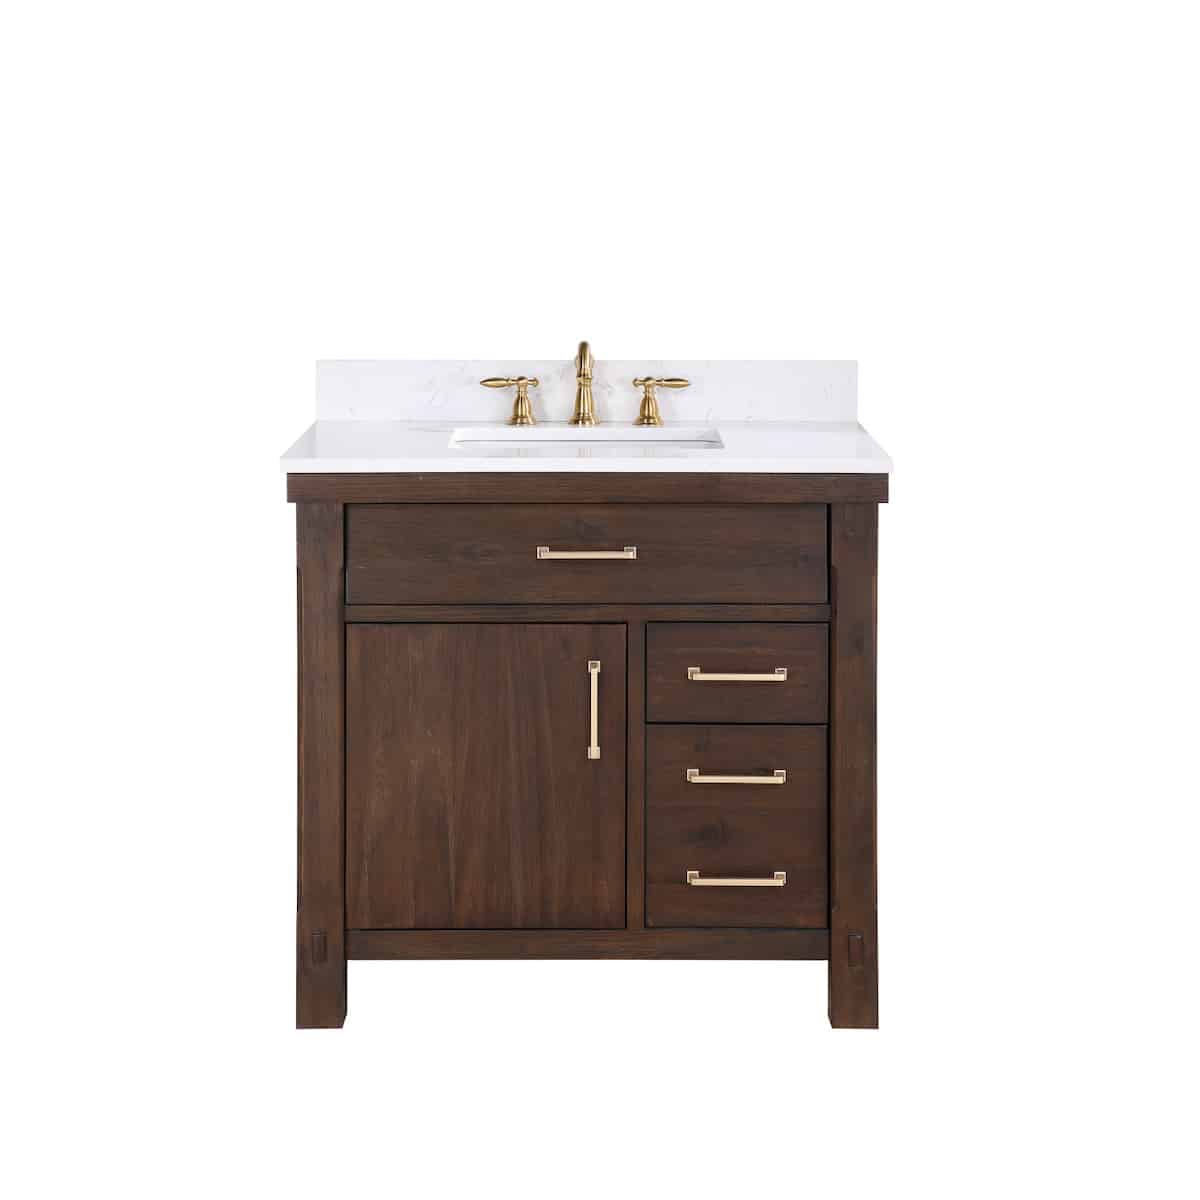 Vinnova Viella 36 Inch Freestanding Single Sink Bath Vanity in Deep Walnut Finish with White Composite Countertop Without Mirror 701836-DW-WS-NM